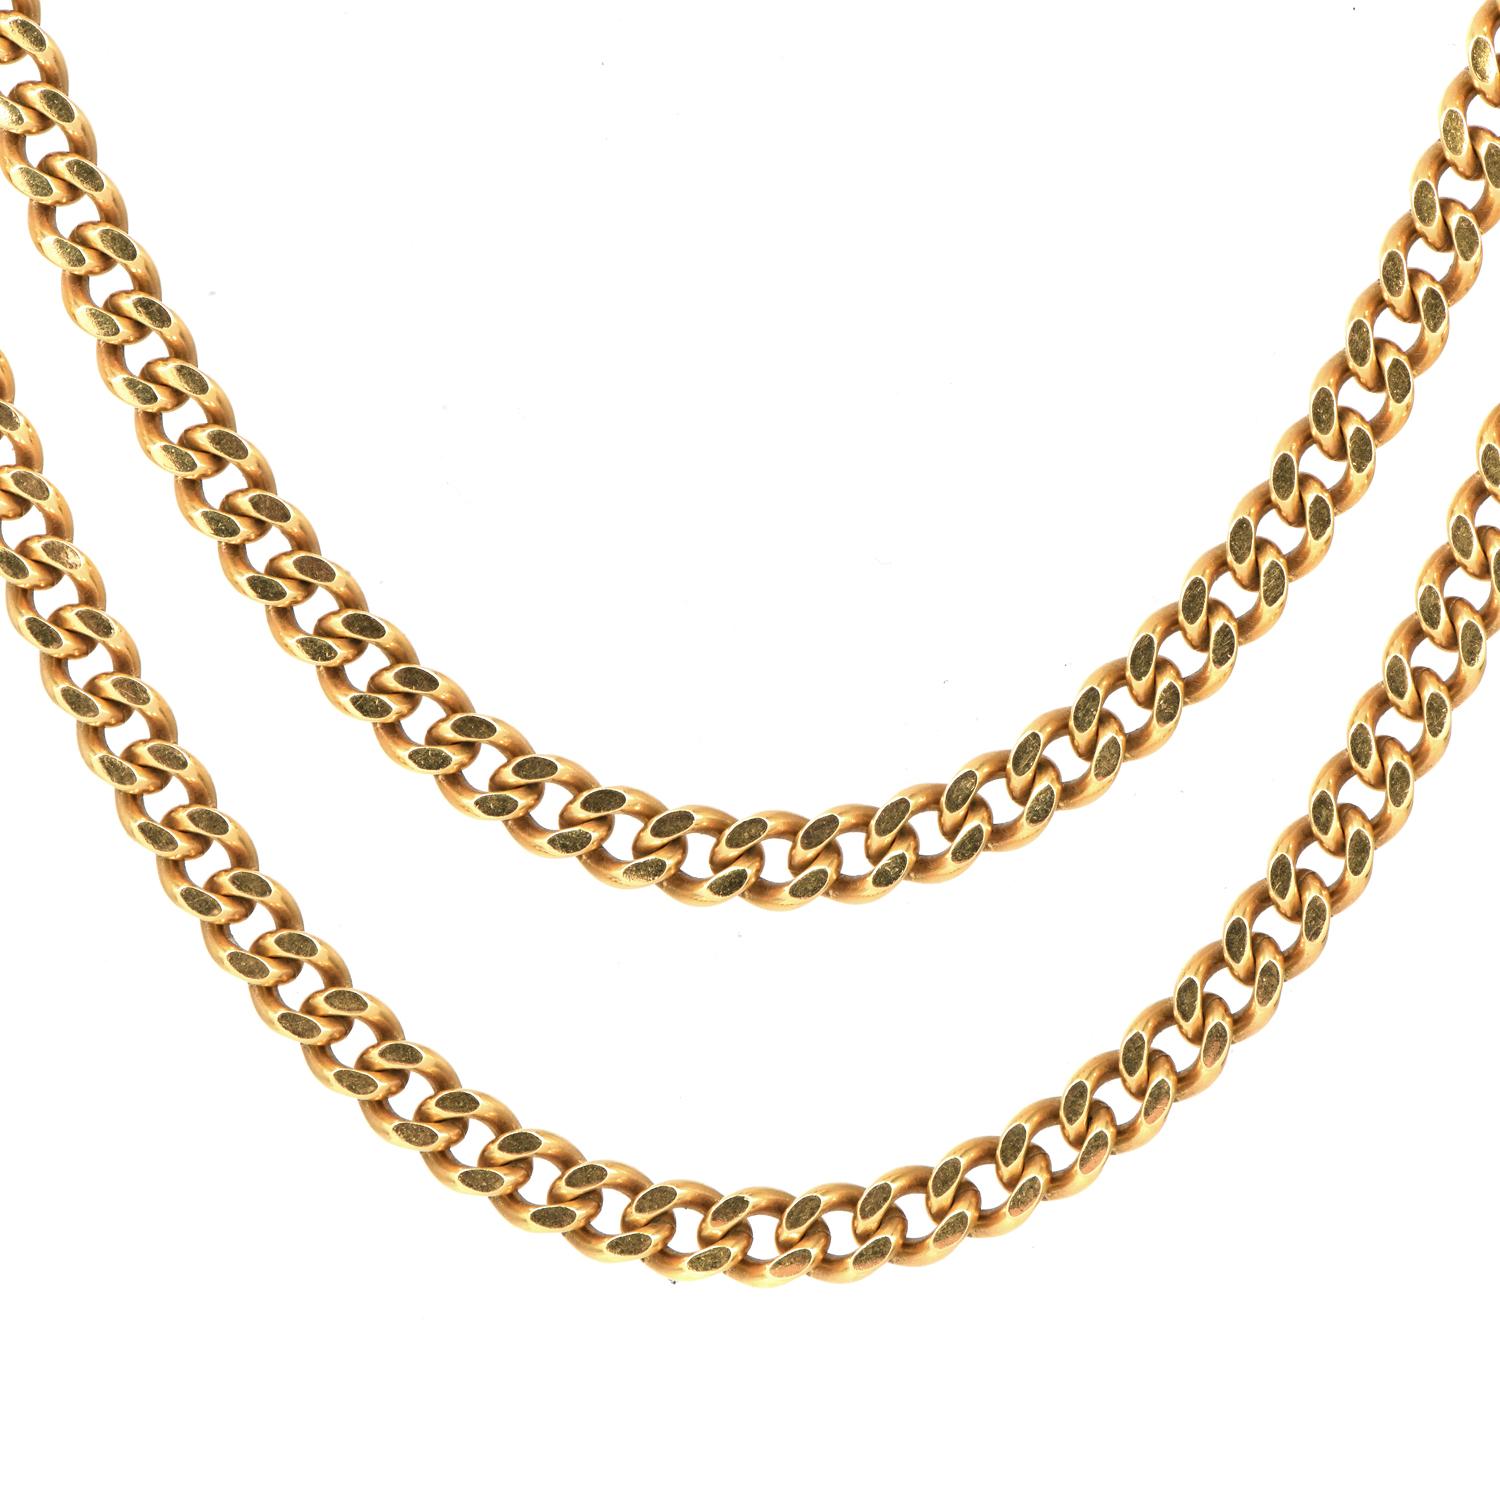 Retro 1960s Solid 18K Yellow Gold Curb Link Chain Necklace